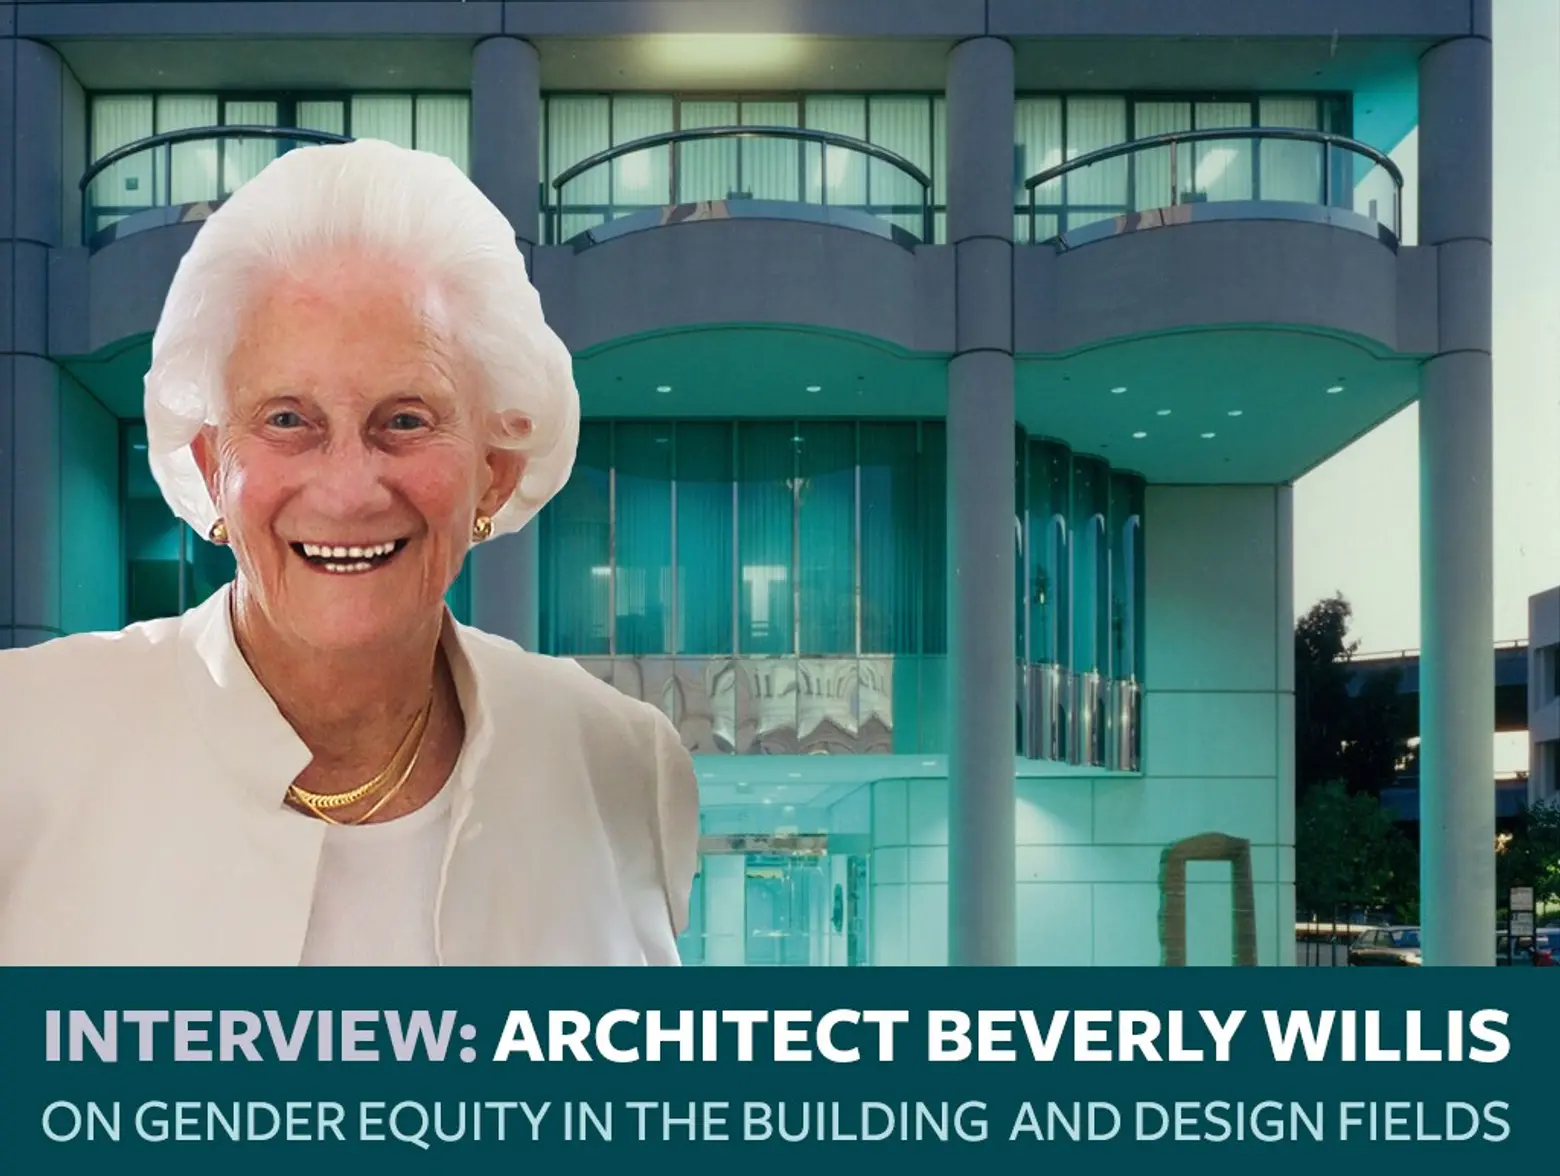 INTERVIEW: Legendary architect Beverly Willis on gender equity in the building and design industry